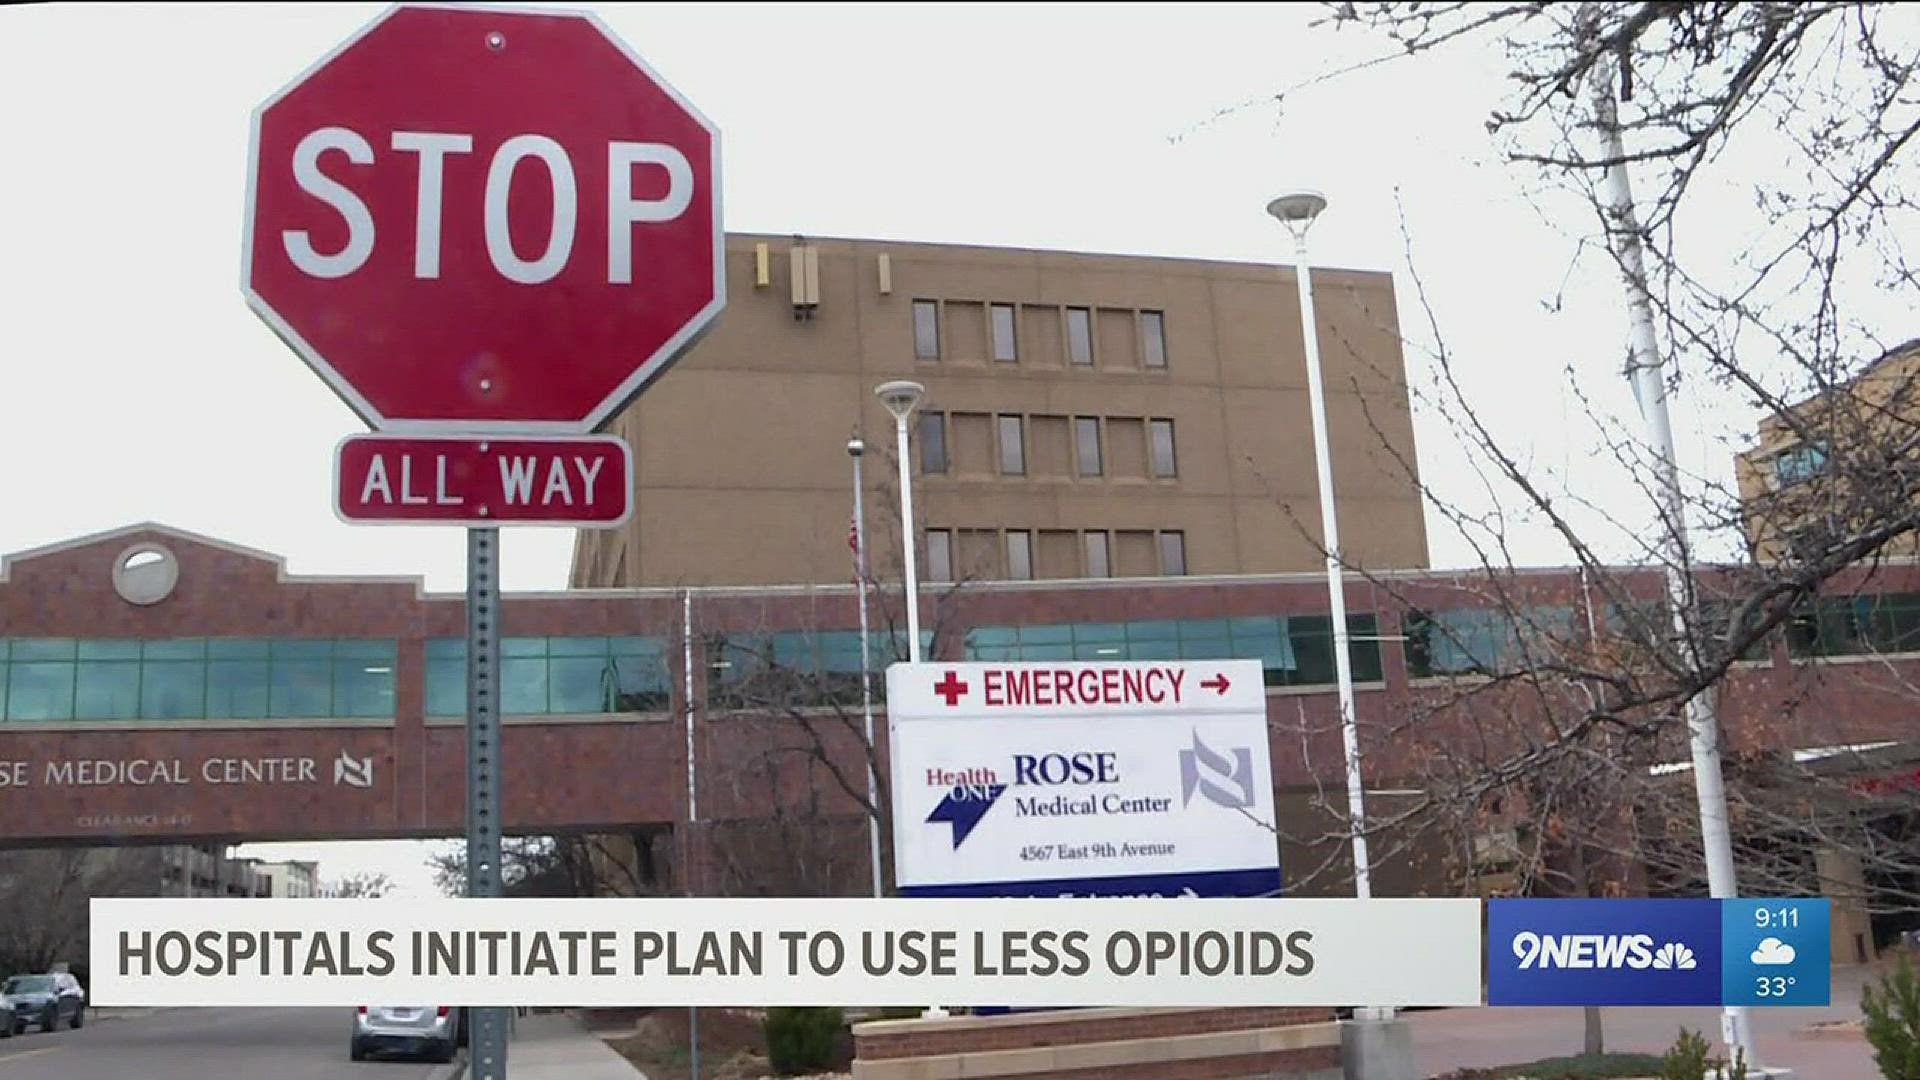 The Colorado Hospital Association launched the project starting with emergency rooms